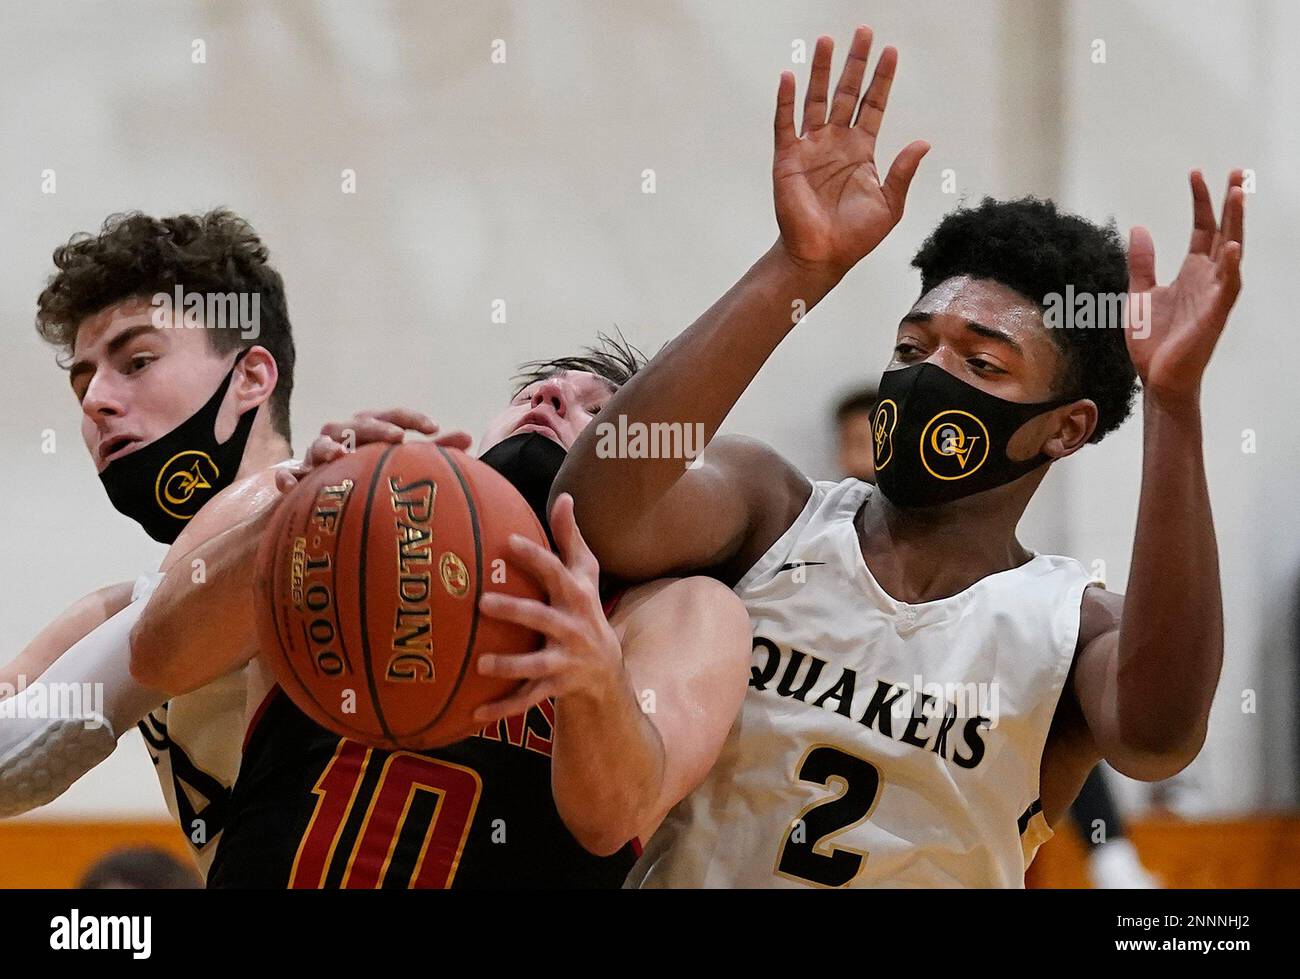 North Catholic's Matt Gregor battles Quaker Valley's Malcolm Jordan for a  rebound during a basketball game Monday, March 8, 2021, at Quaker Valley  High School in Leetsdale, Pa. (Peter Diana/Pittsburgh Post-Gazette via